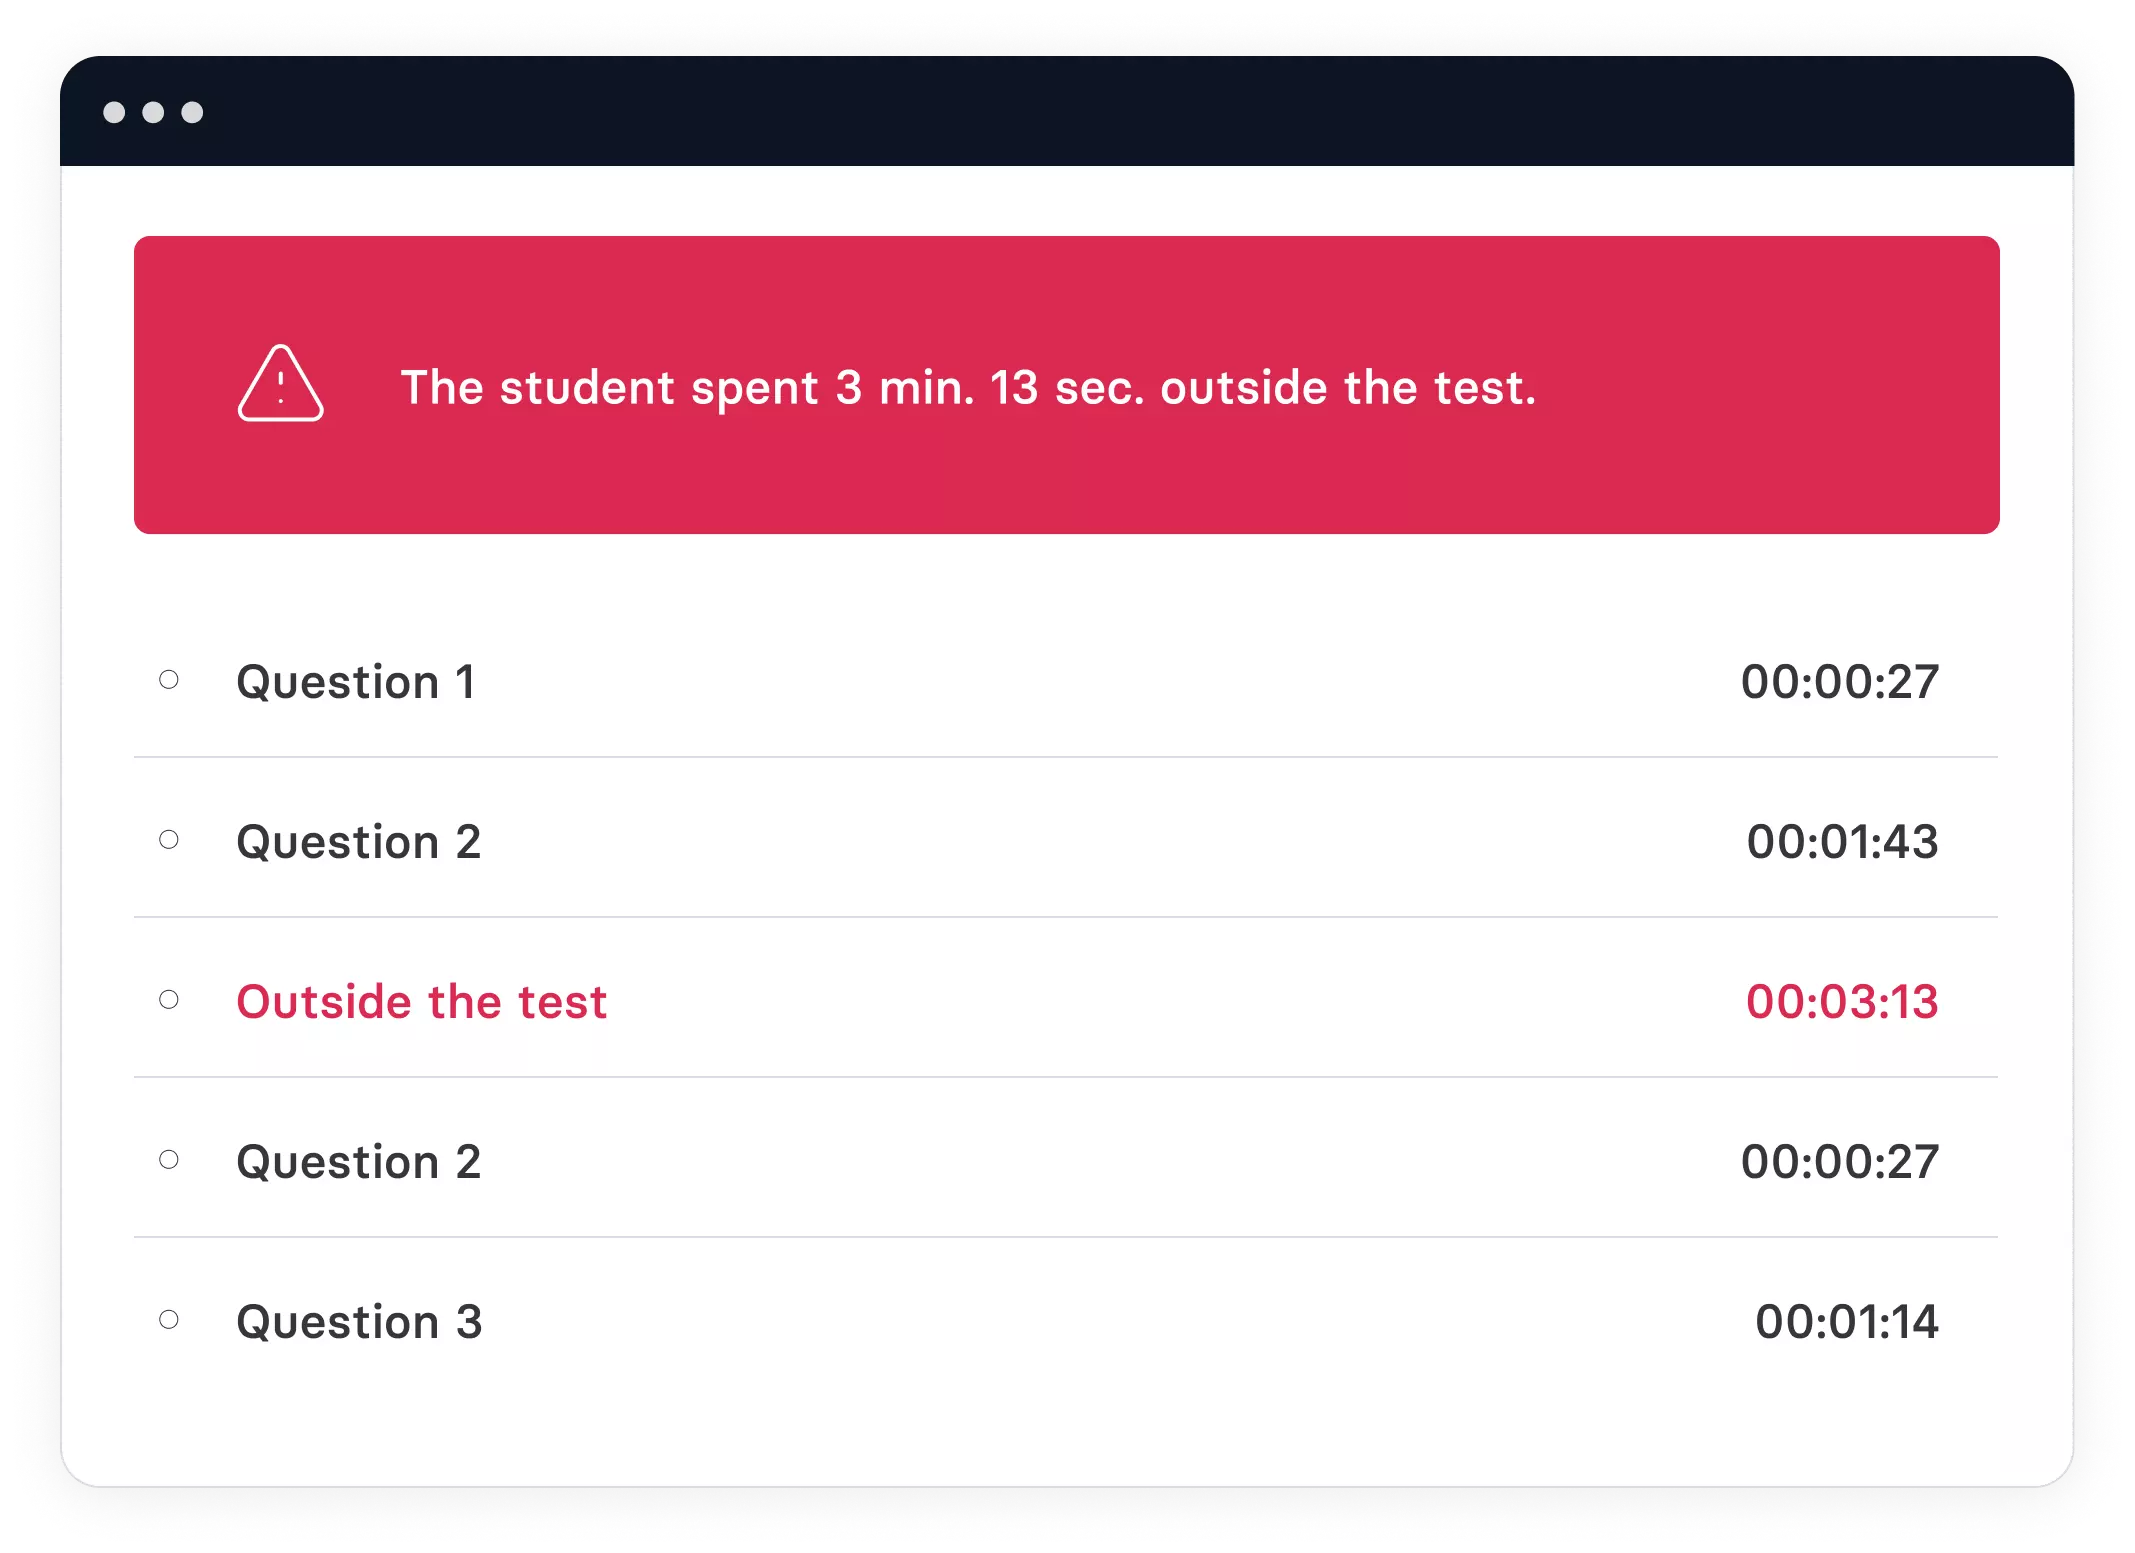 Cheating prevention system in Examica.io platform